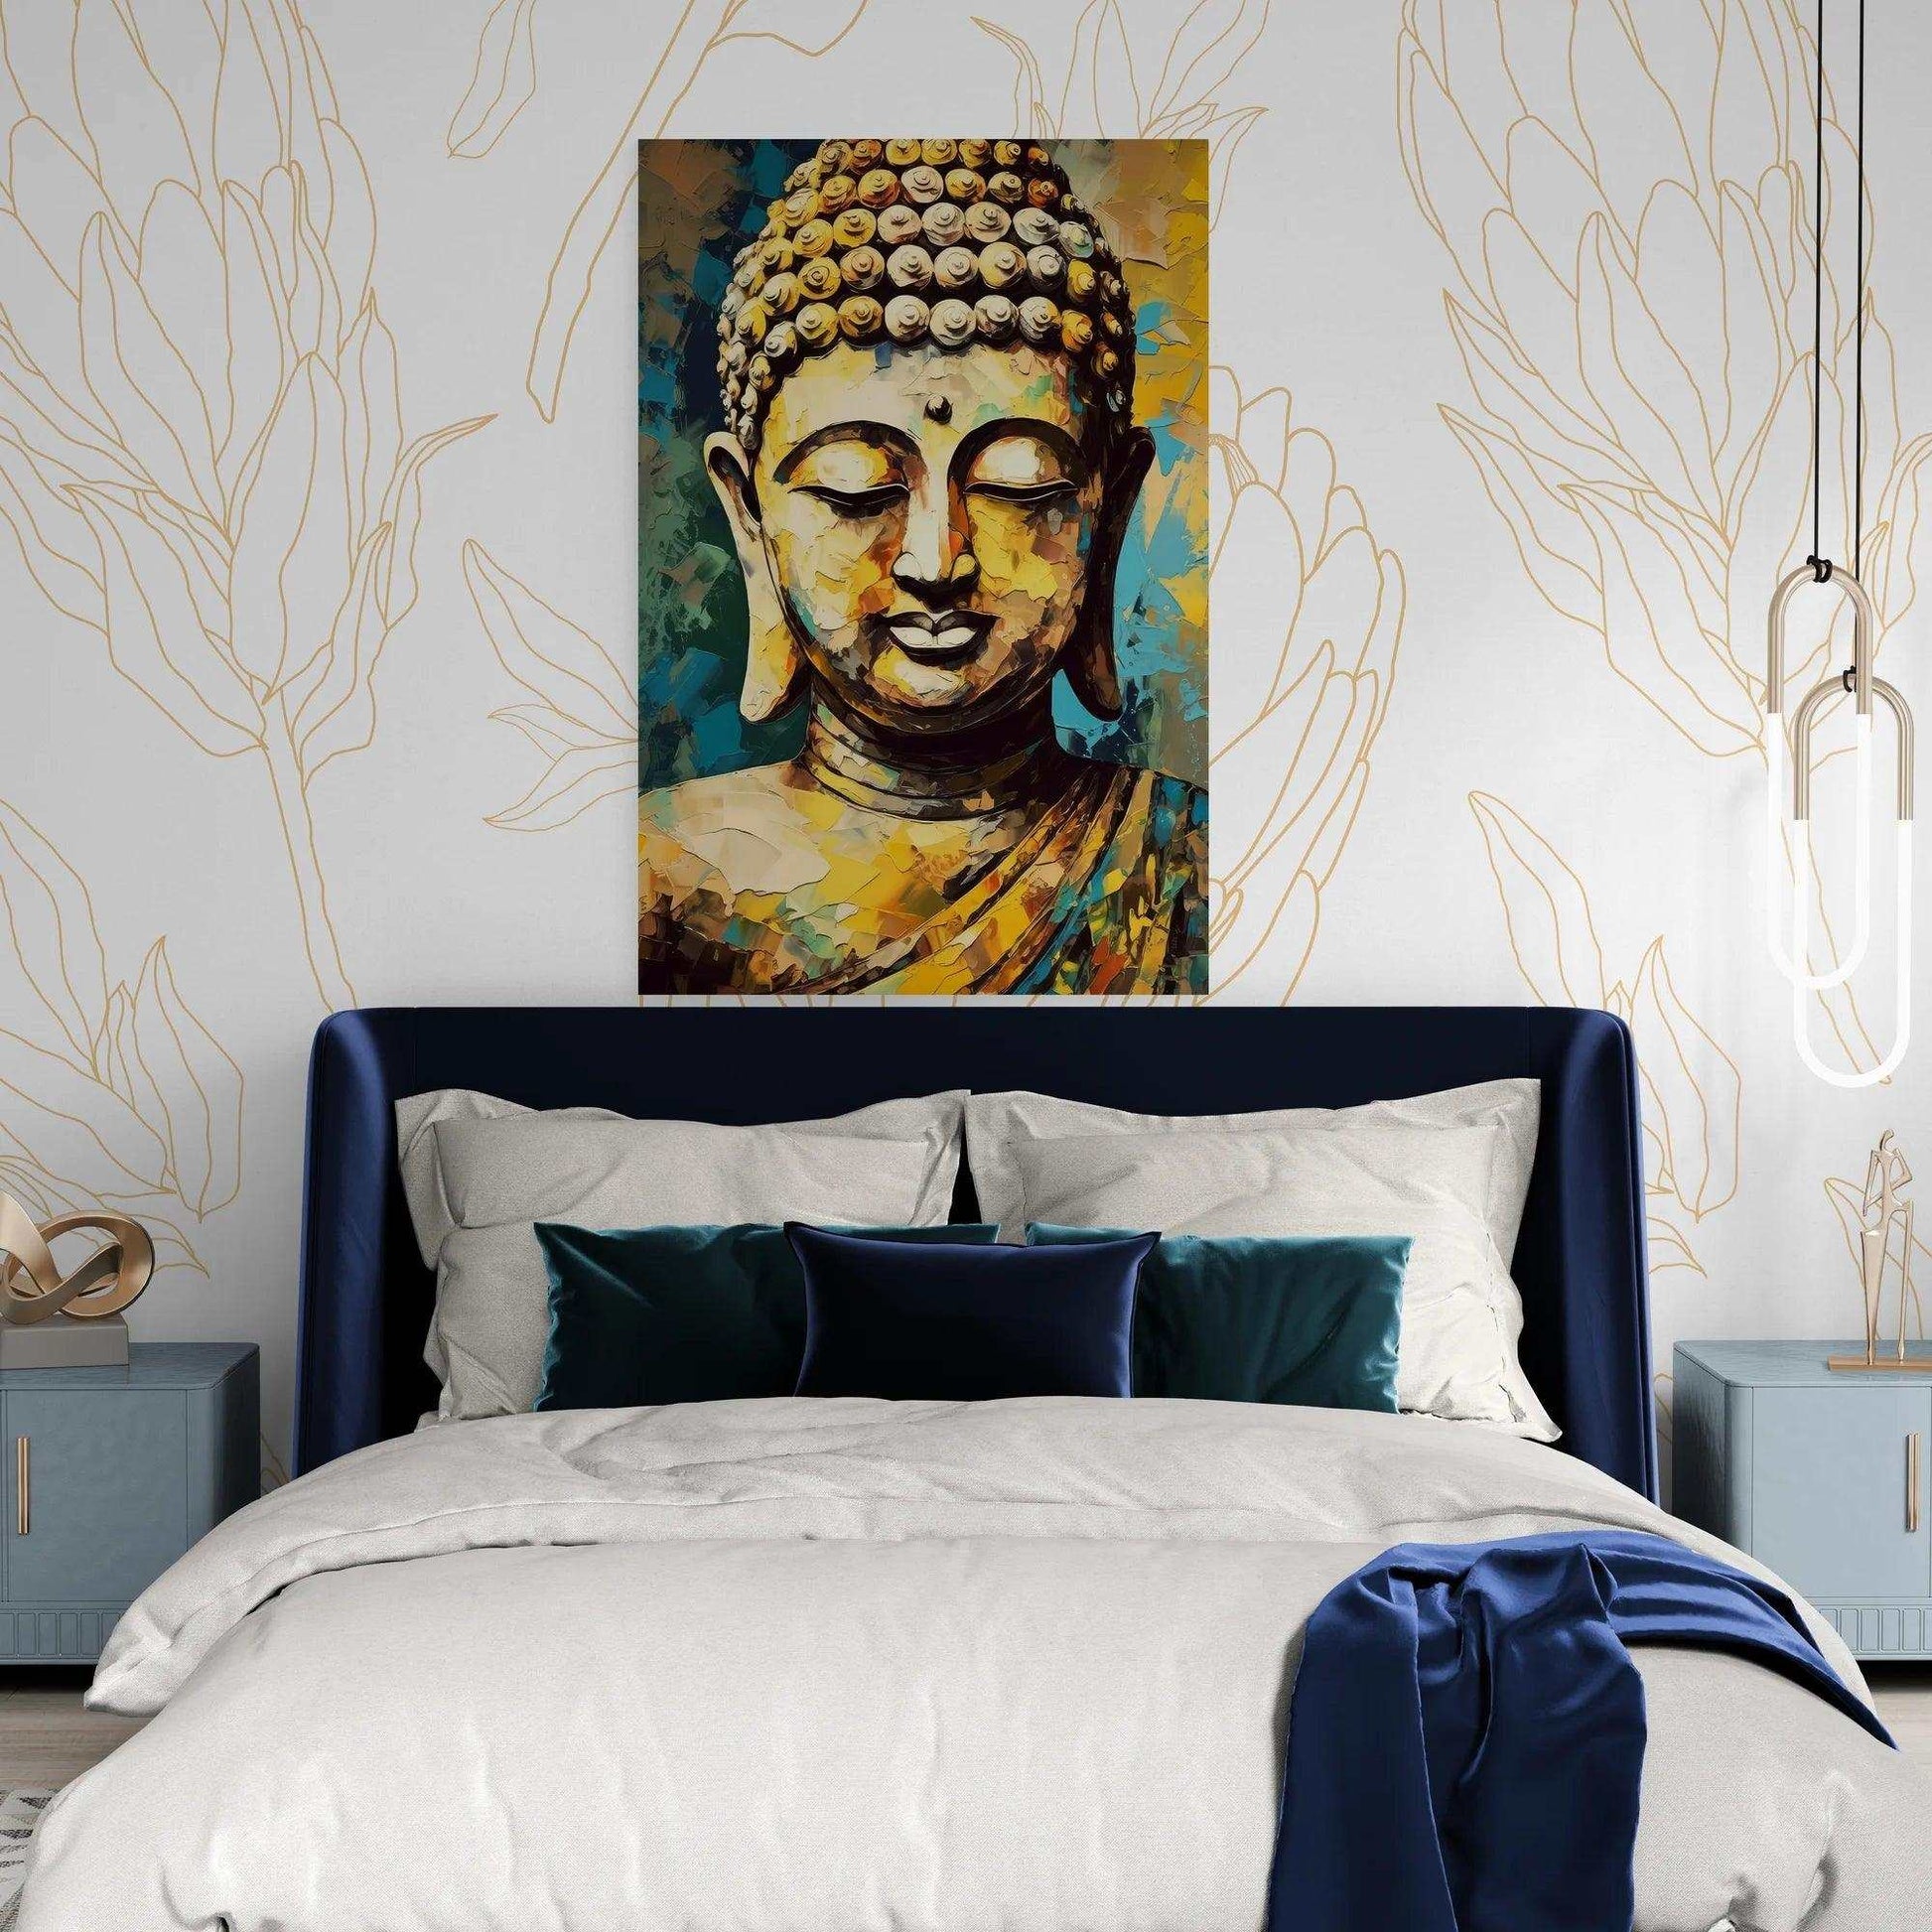 Vibrant poster of Buddha's face with abstract golden and teal brushstrokes, positioned above a navy blue bed with matching and contrasting pillows, flanked by stylized line art on the wall.